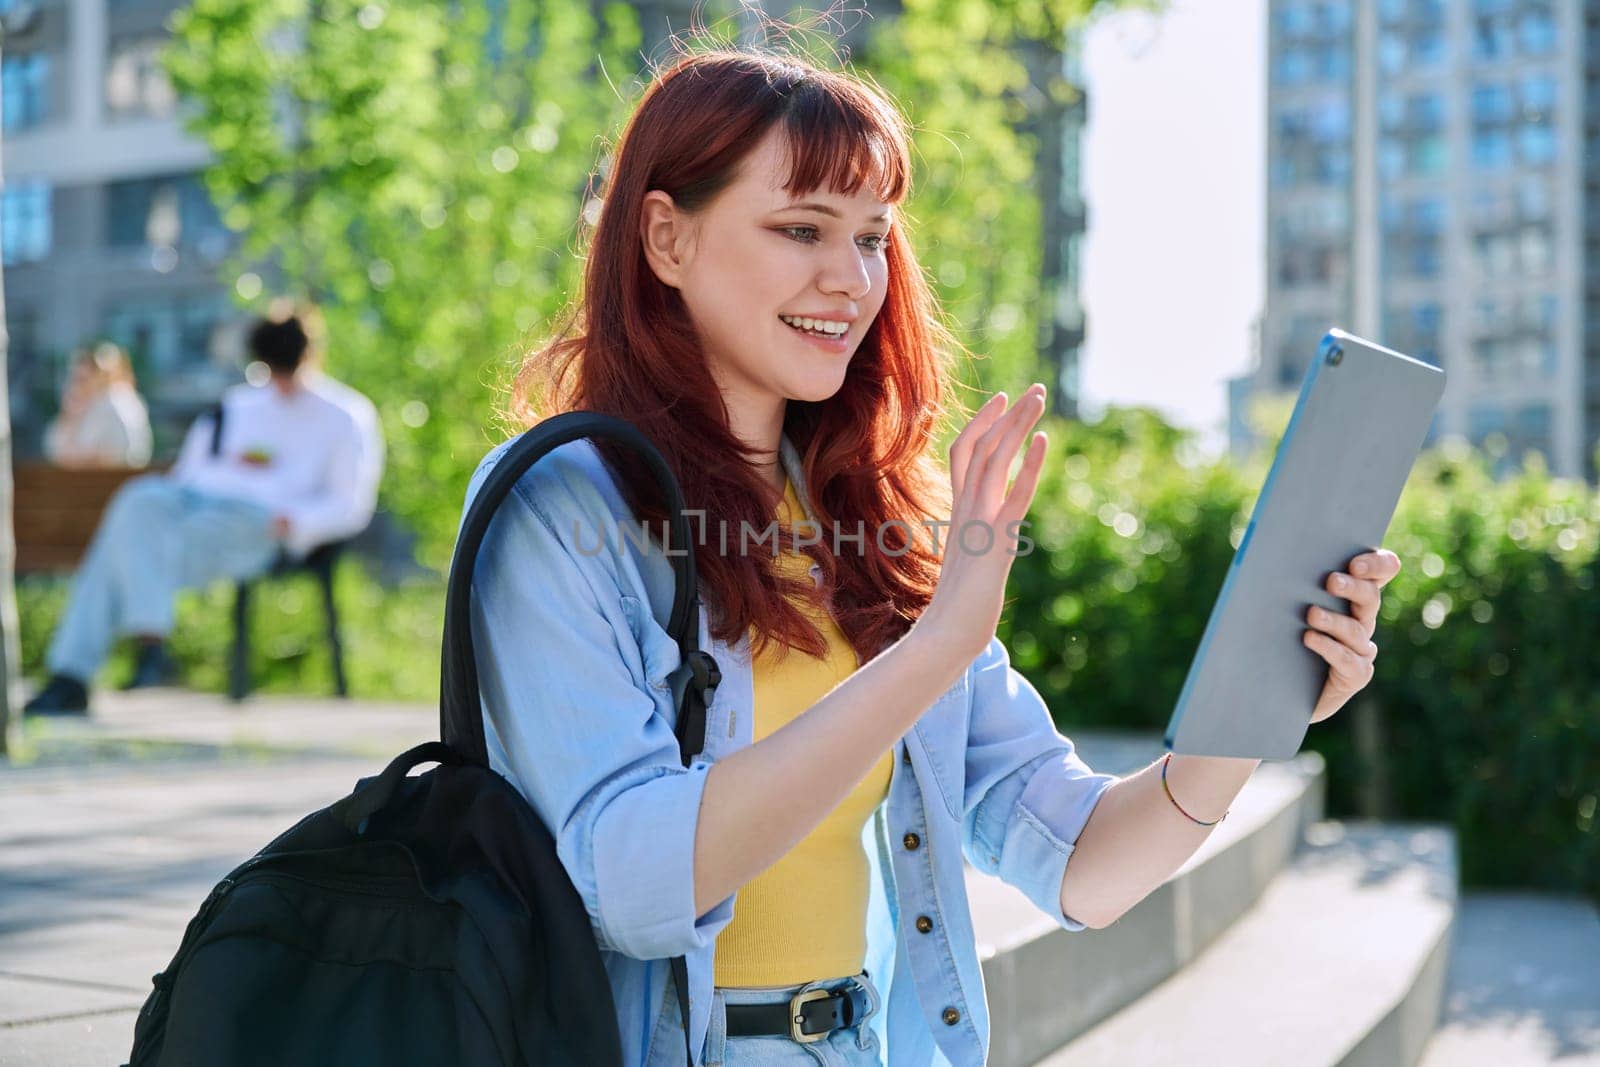 Young attractive female college student using digital tablet outdoor, talking on video call chat conference, educational building background. Education, technology, training, 19,20 years age youth concept